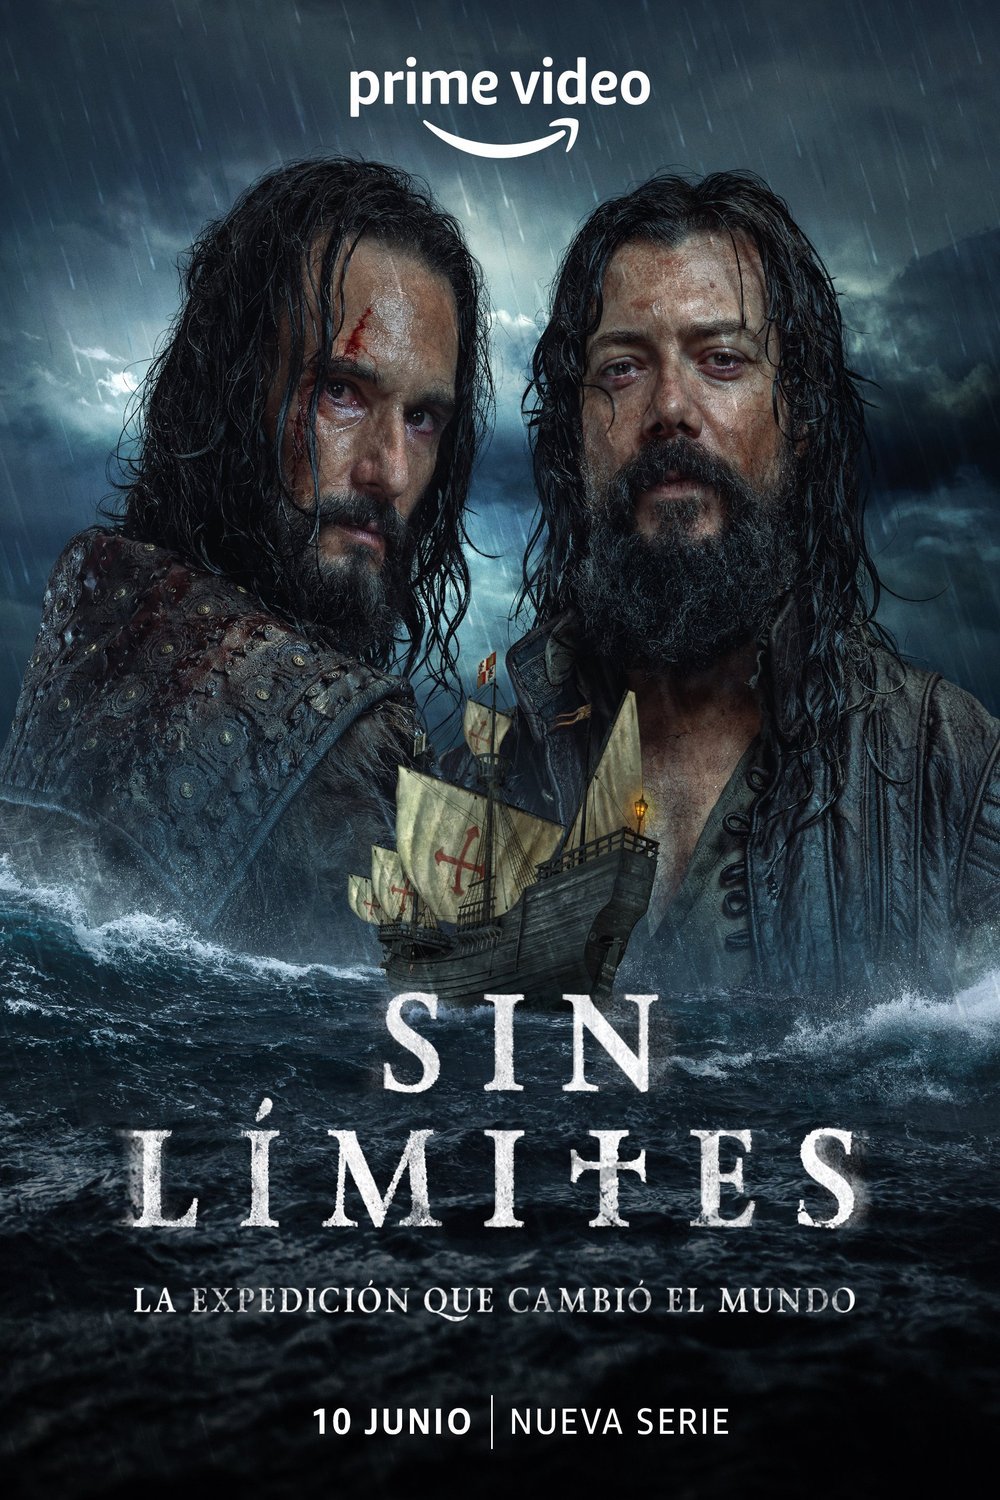 Spanish poster of the movie Sin límites